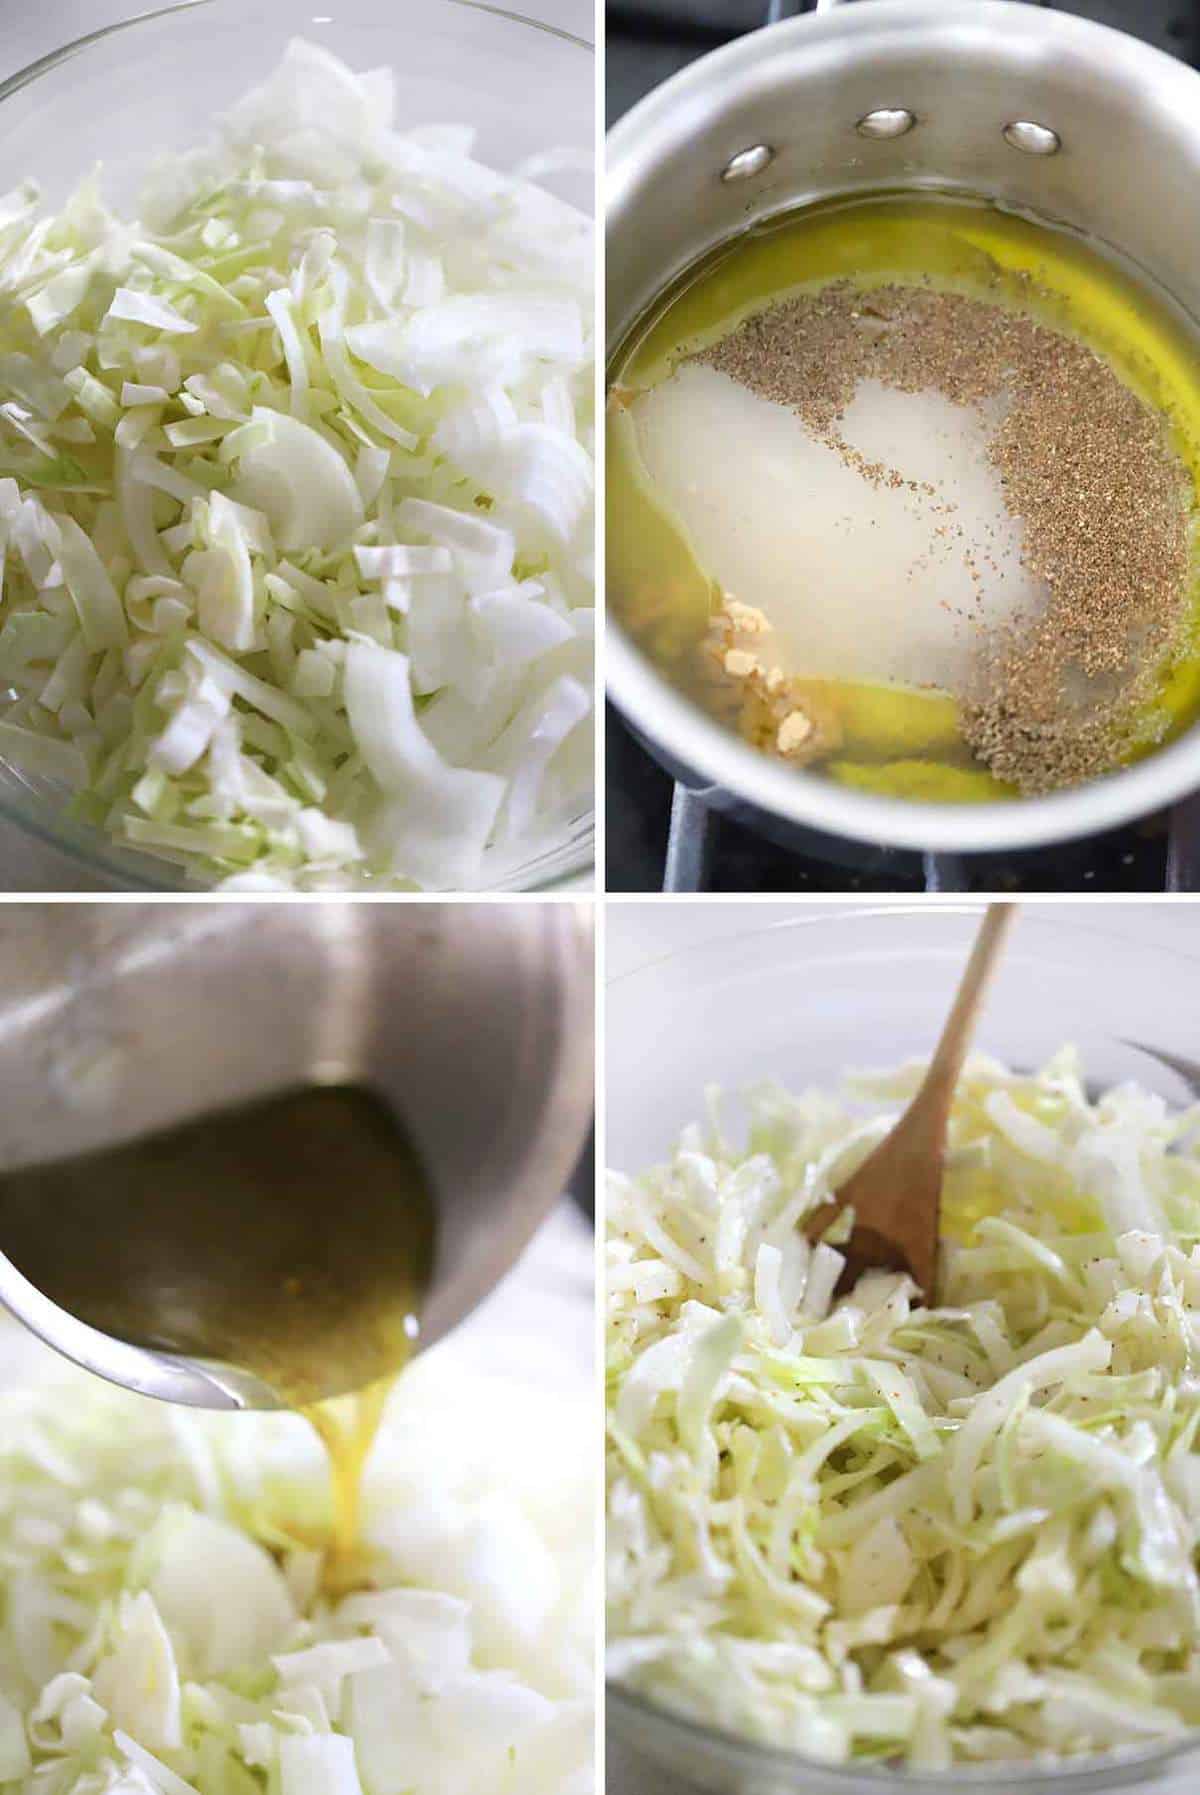 How to pour vinegar dressing with celery seed over cabbage and onion to make no mayo coleslaw.